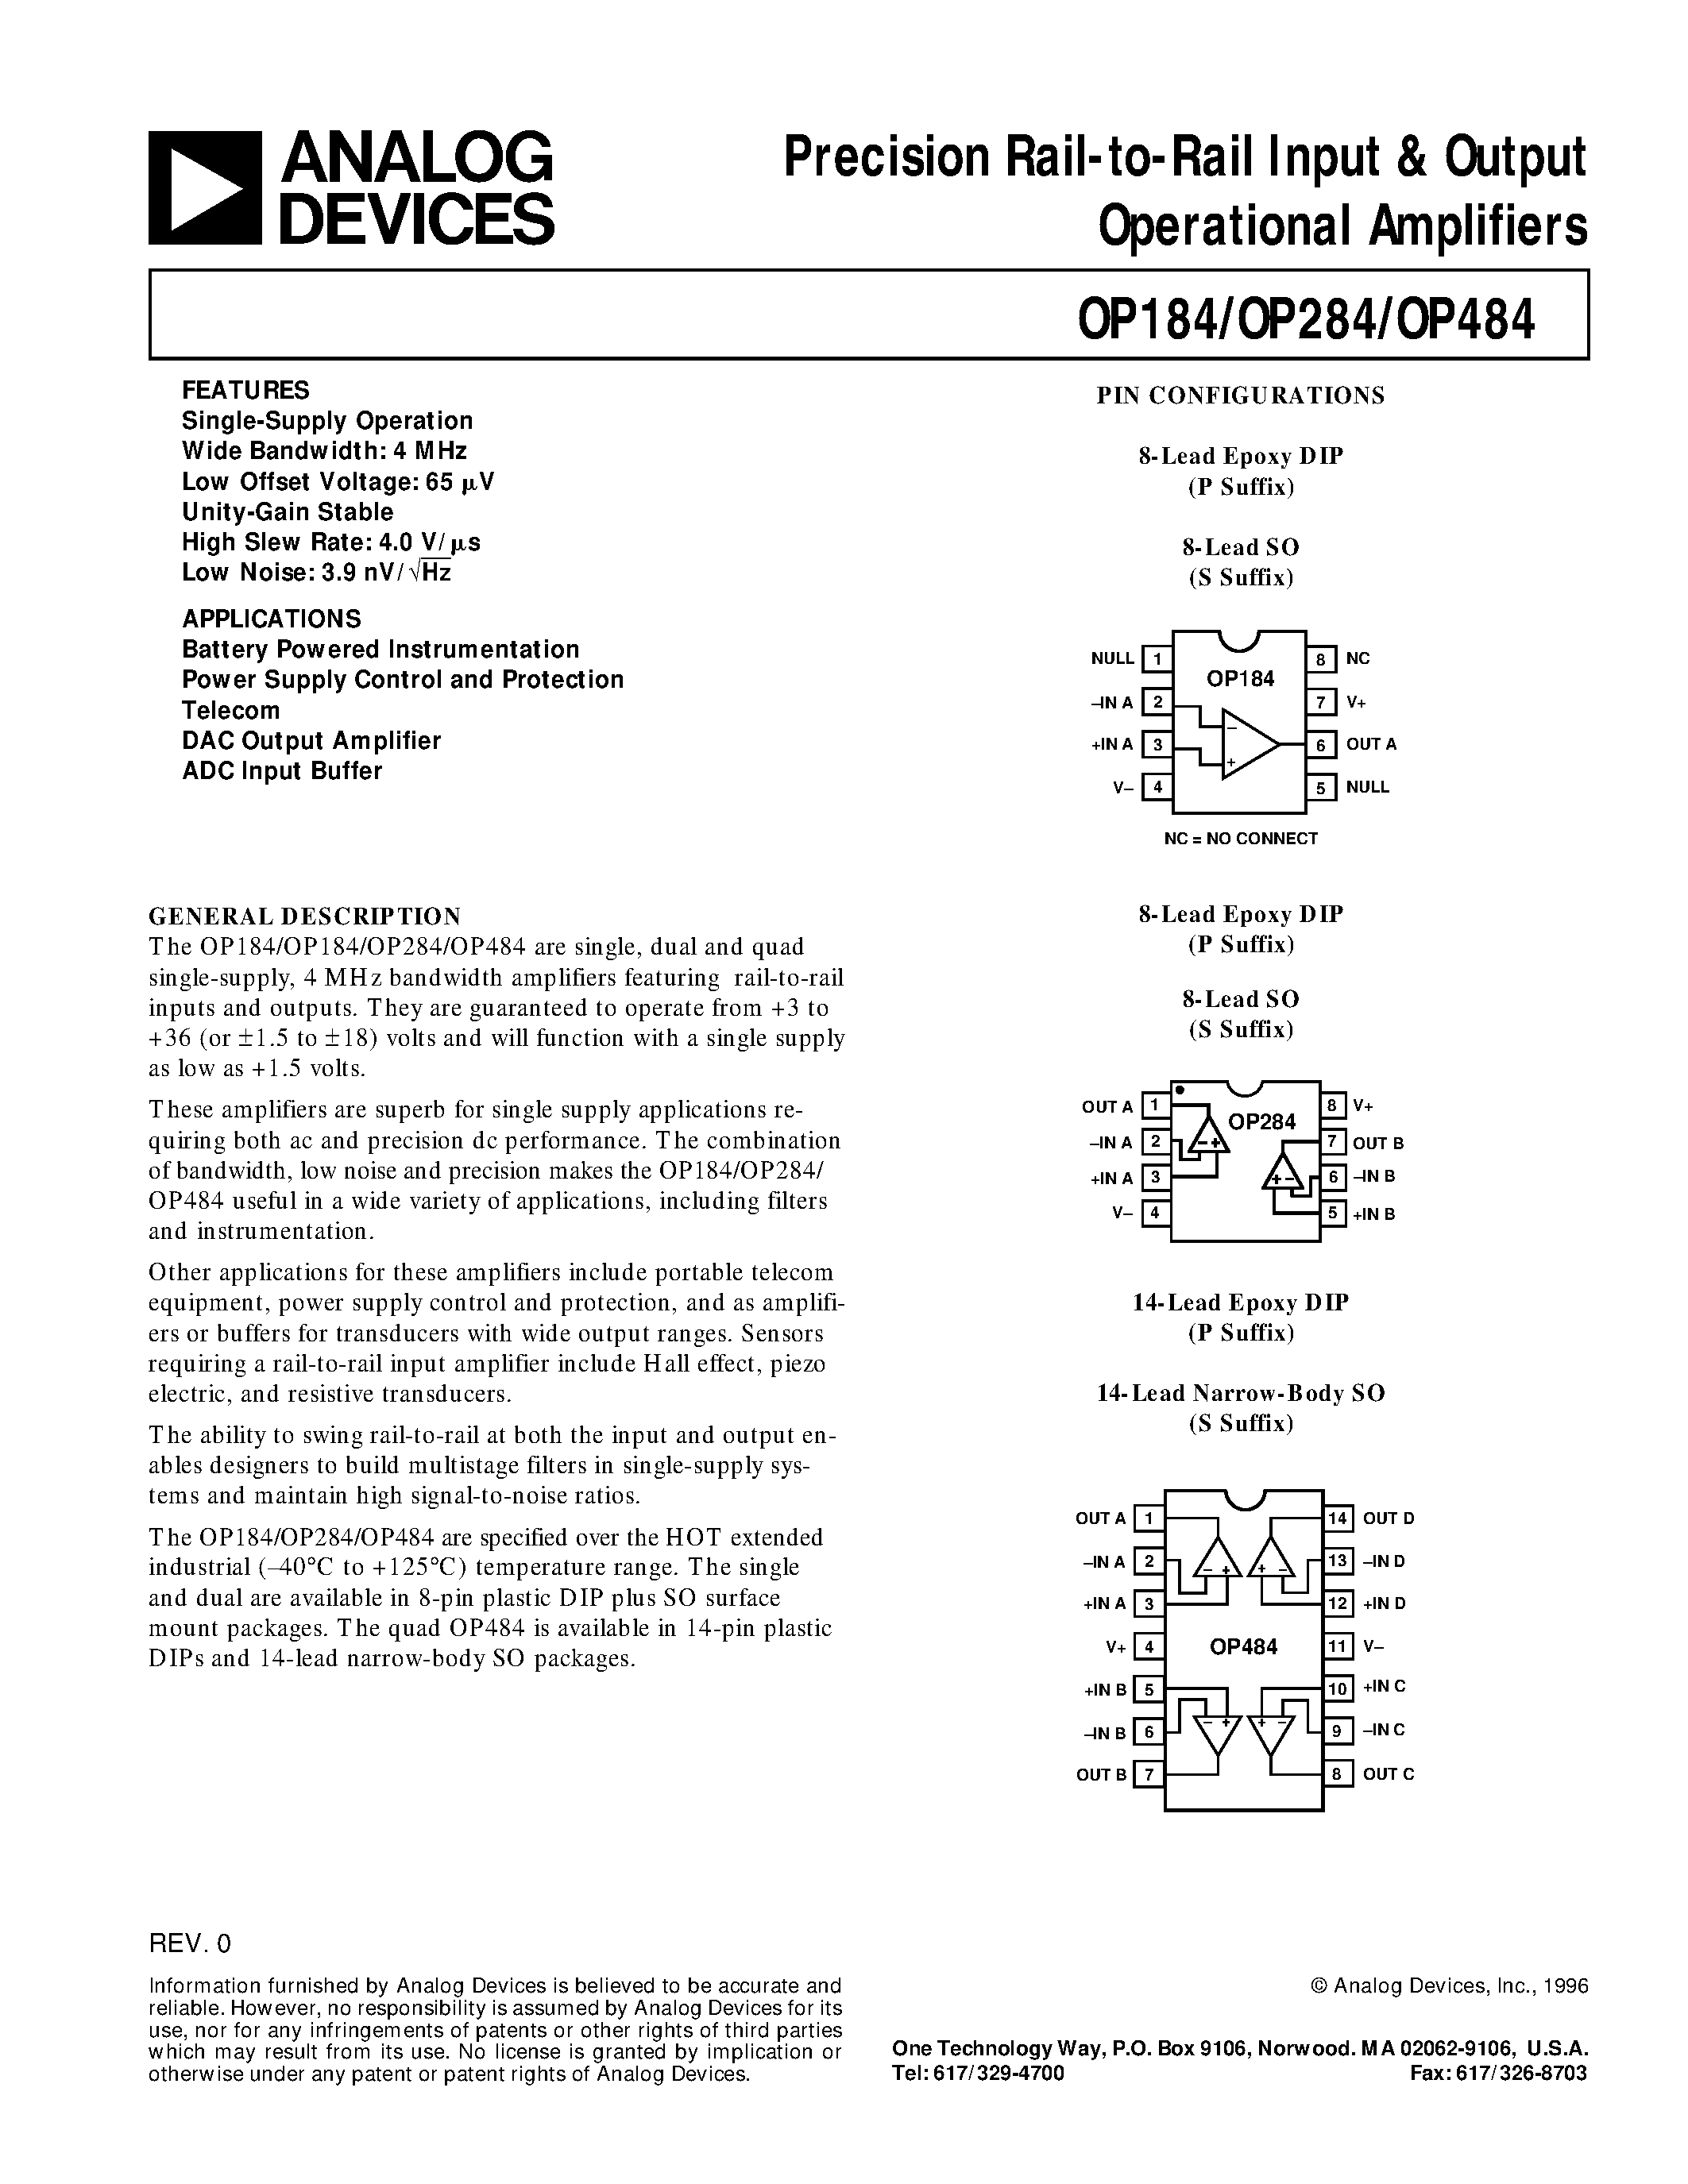 Datasheet OP284 - Precision Rail-to-Rail Input & Output Operational Amplifiers page 1